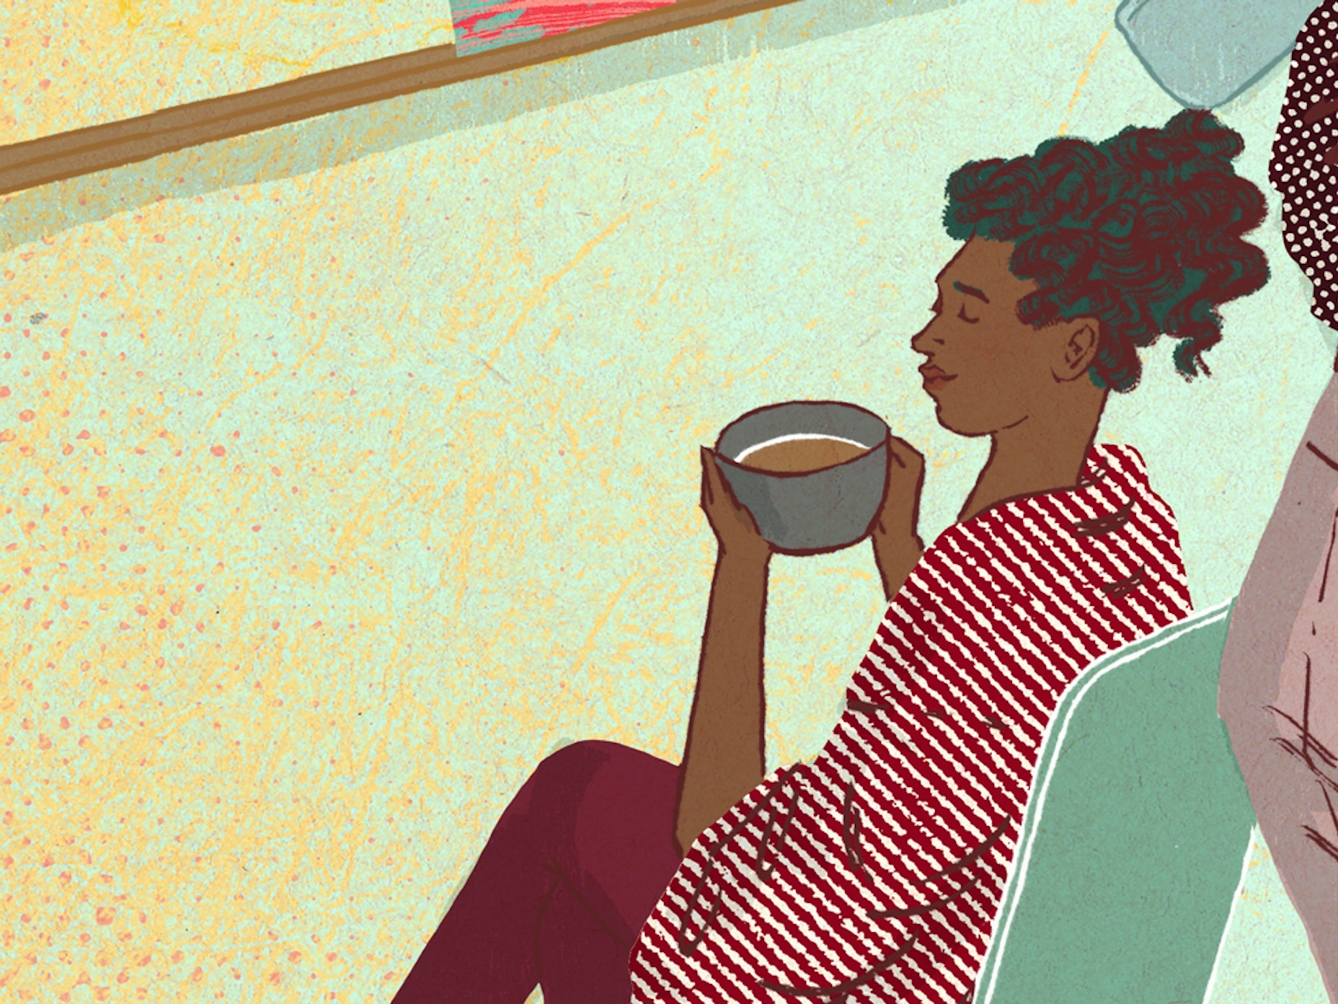 A digital illustration of someone in a café. They are relaxing by themselves while drinking from a large coffee cup, they are sat back with their eyes closed.